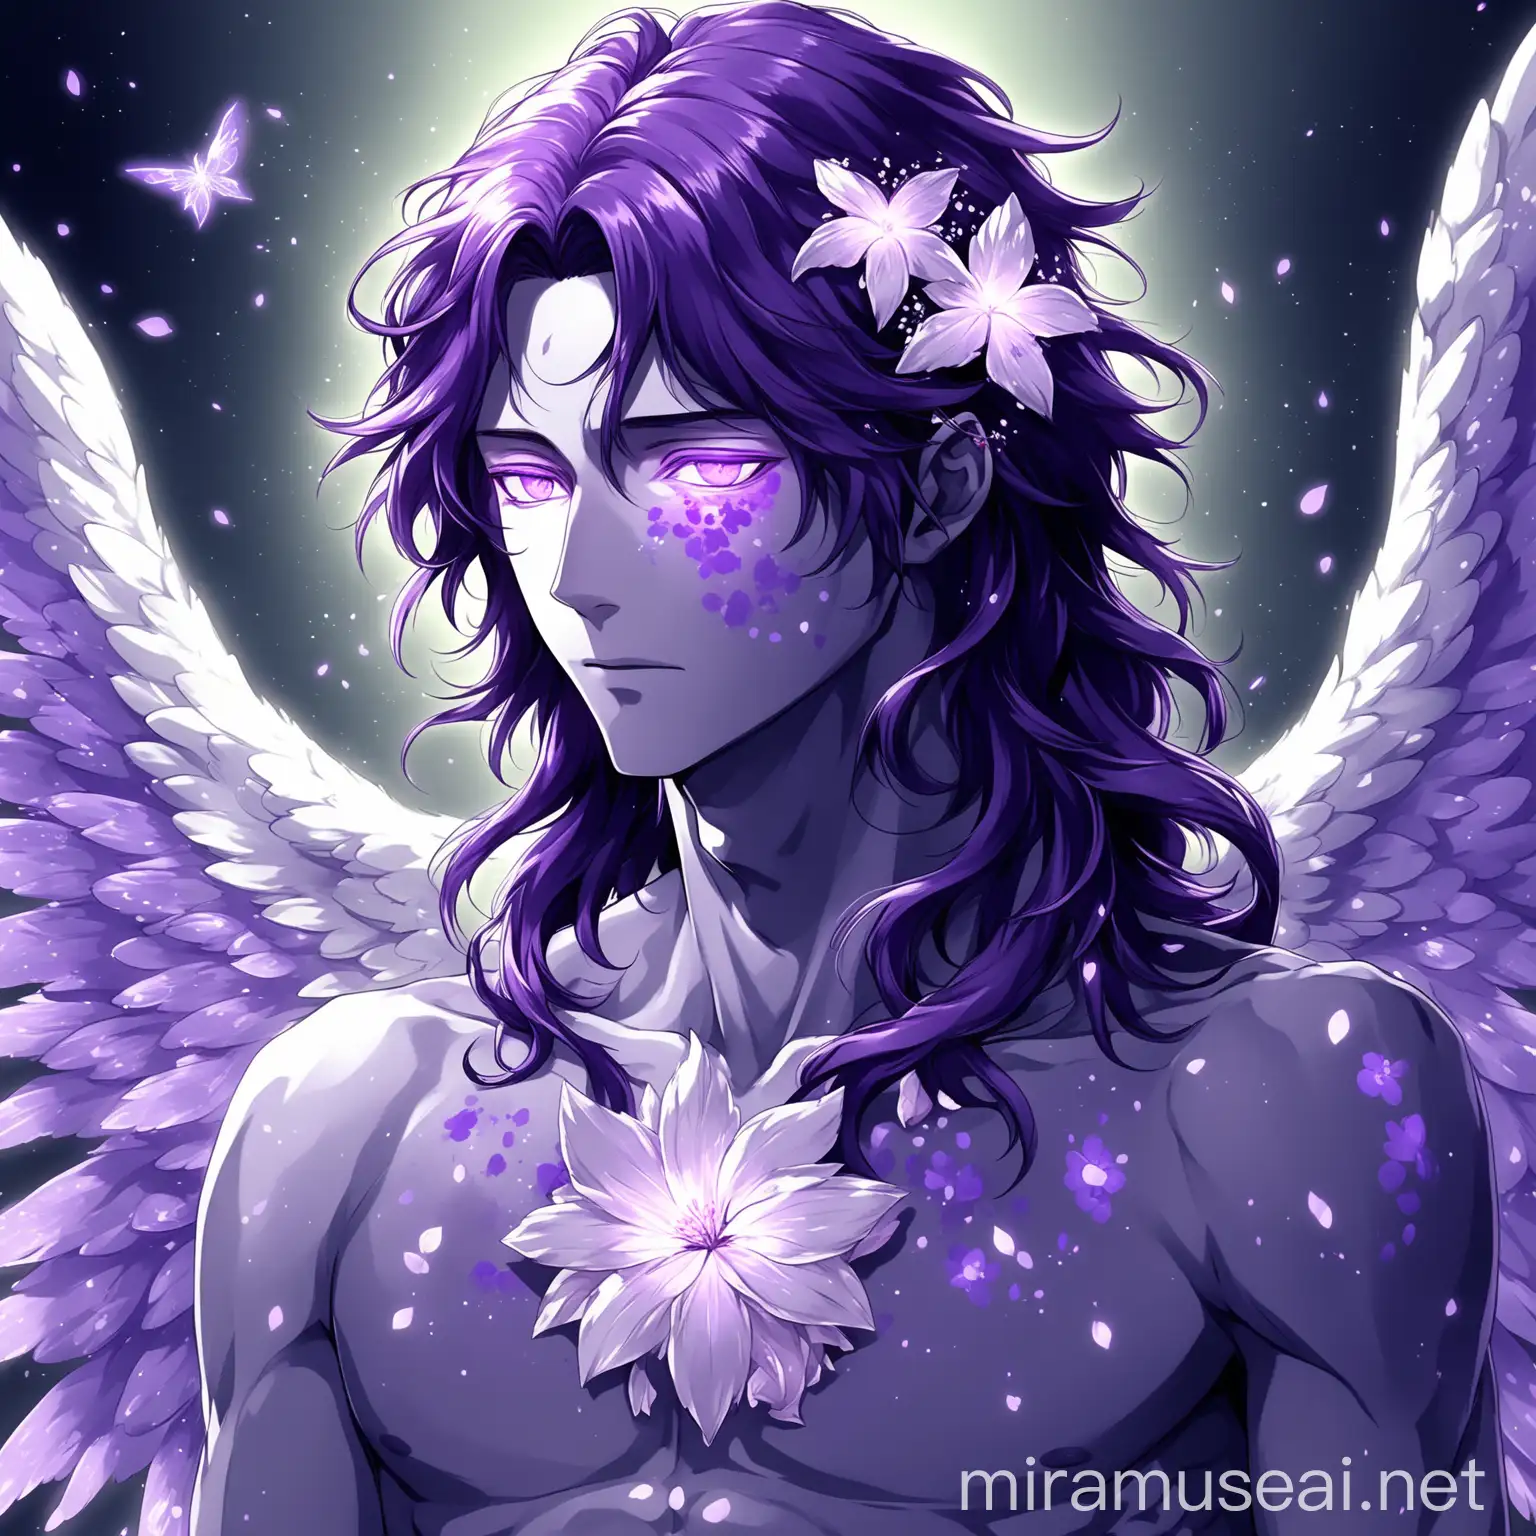 an angelic man, he has purple angelic wings, he has long wavy purple hair, he has a beautiful body, he has green and purple spotted skin, he has luminous violet eyes, he has some poison flower in his hair, he has a quiet peaceful look, in anime